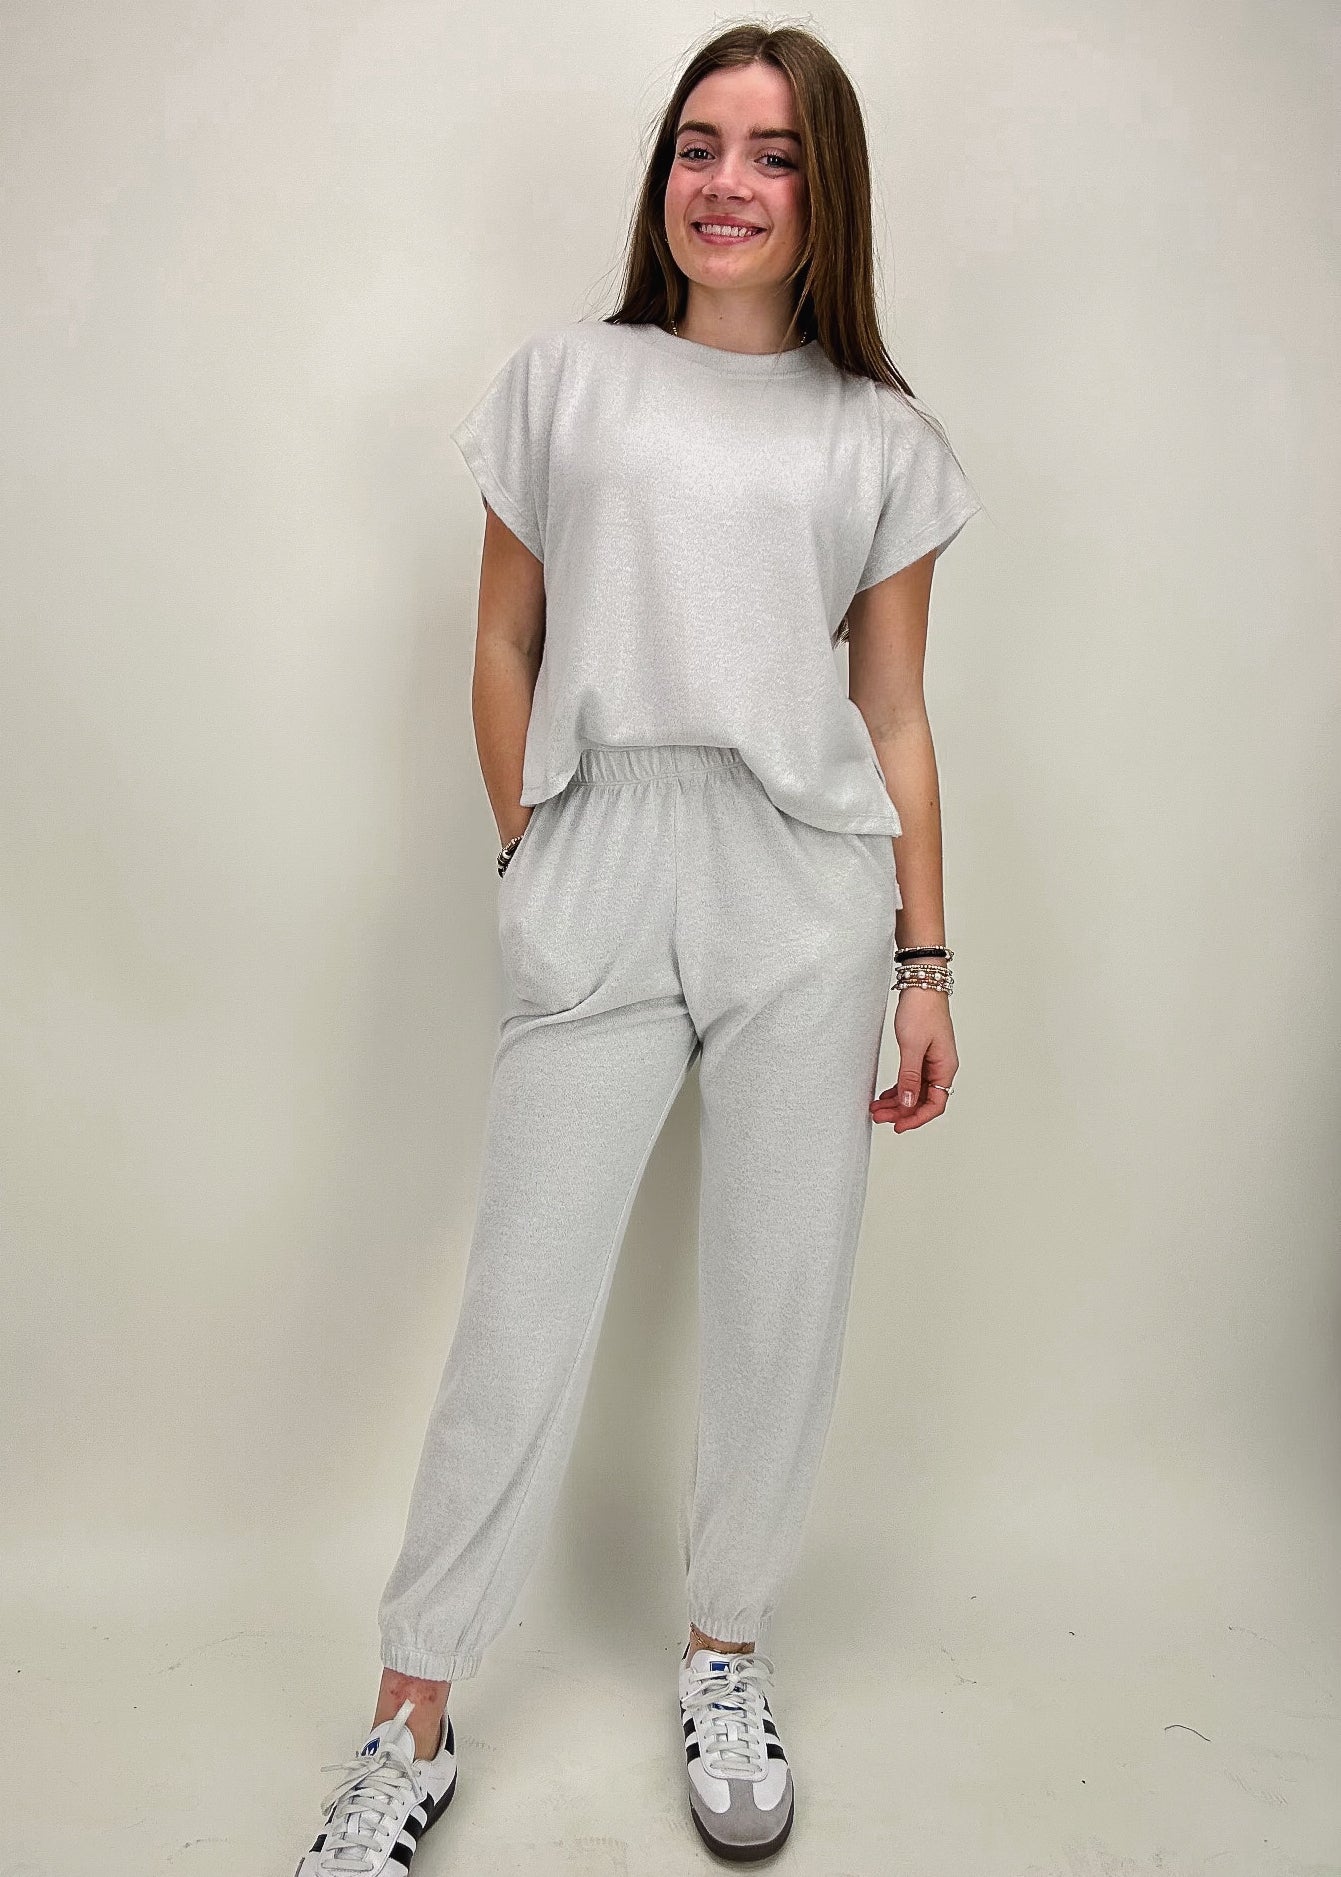 silver jumpsuit with short sleeves, joggers, and fitted waistline